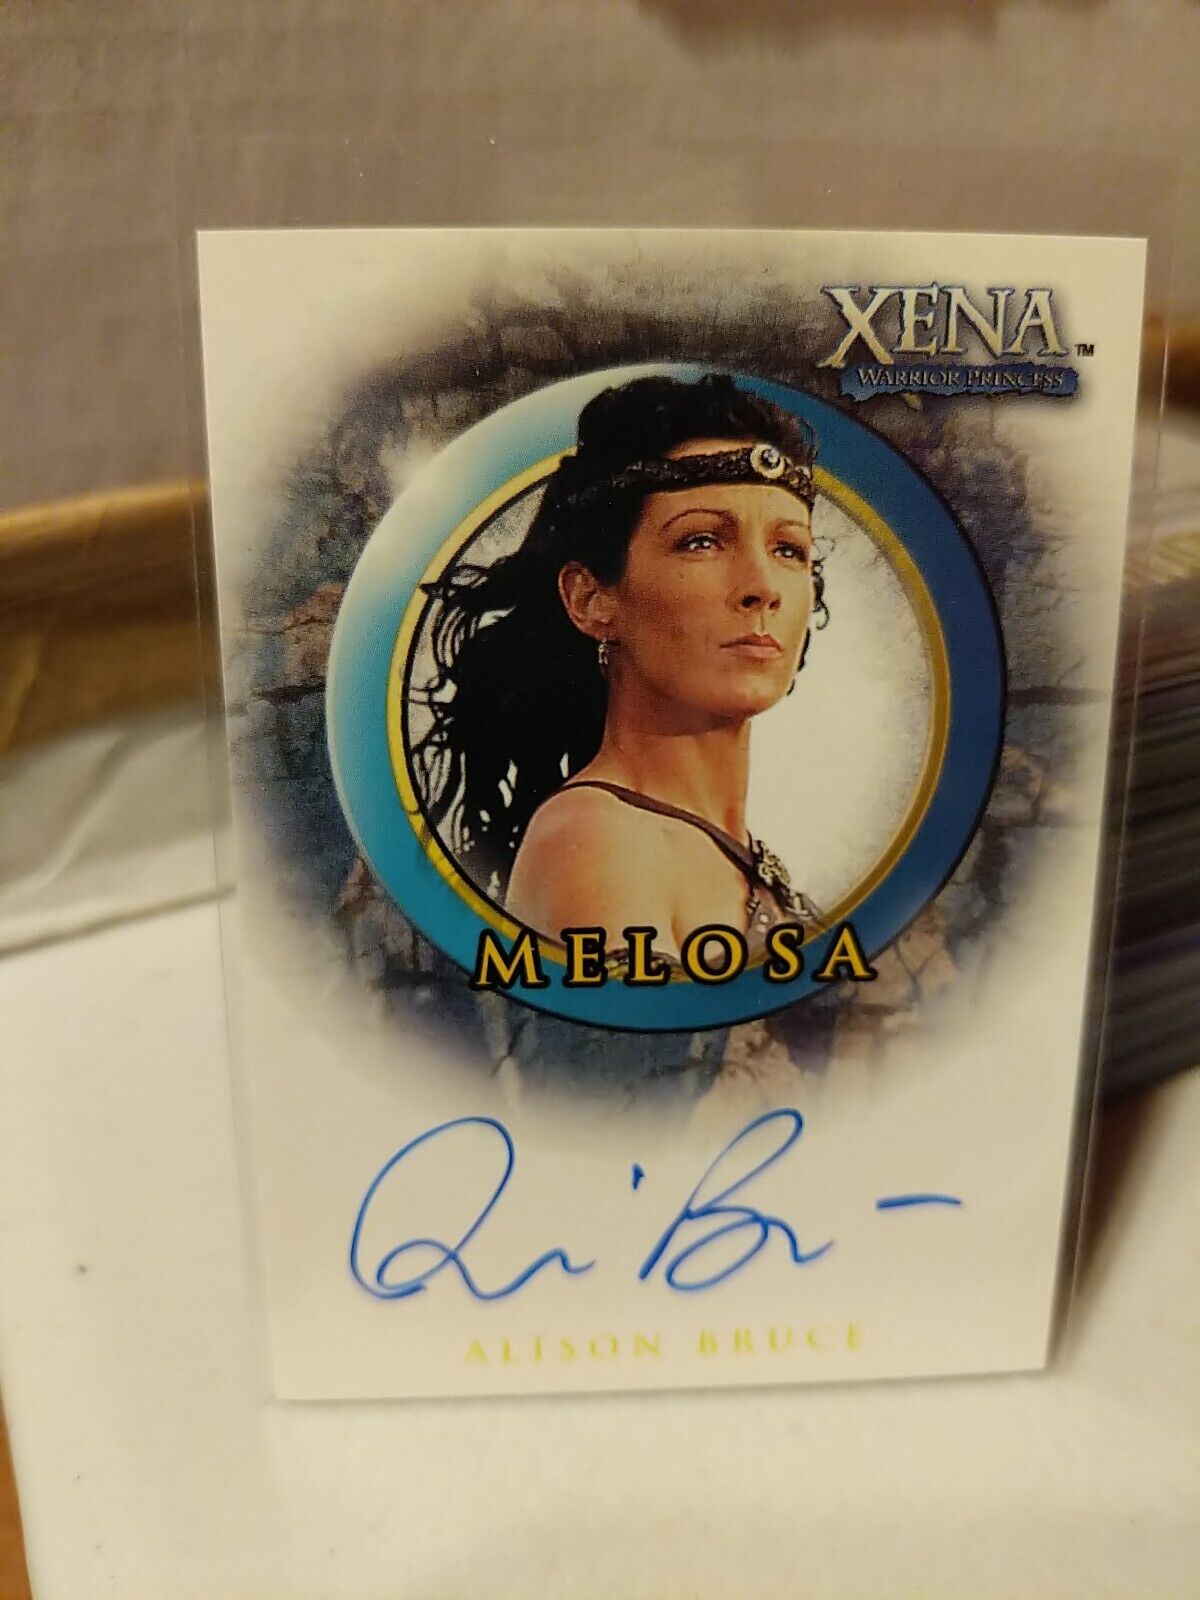 2002 Xena Beauty And Brawn Alison Bruce A24 Autograph Card as Melosa NM 